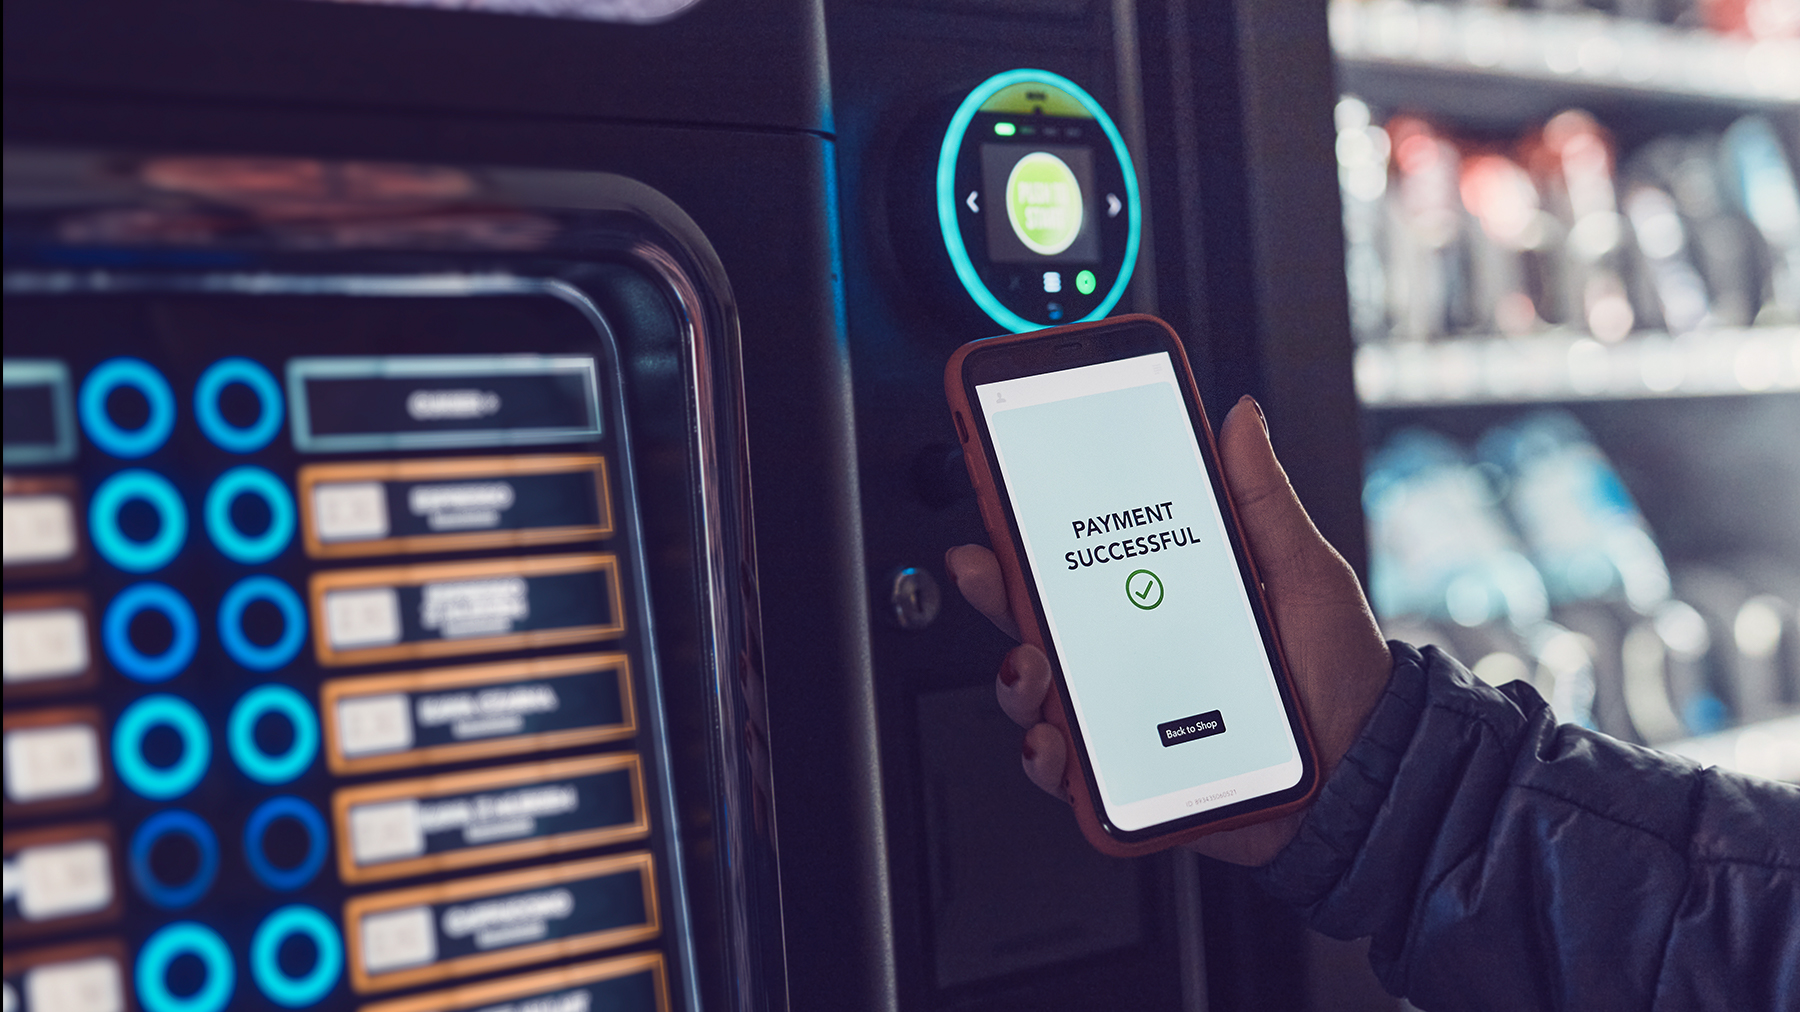  A smart phone is making payment in front of a smart vending machine.